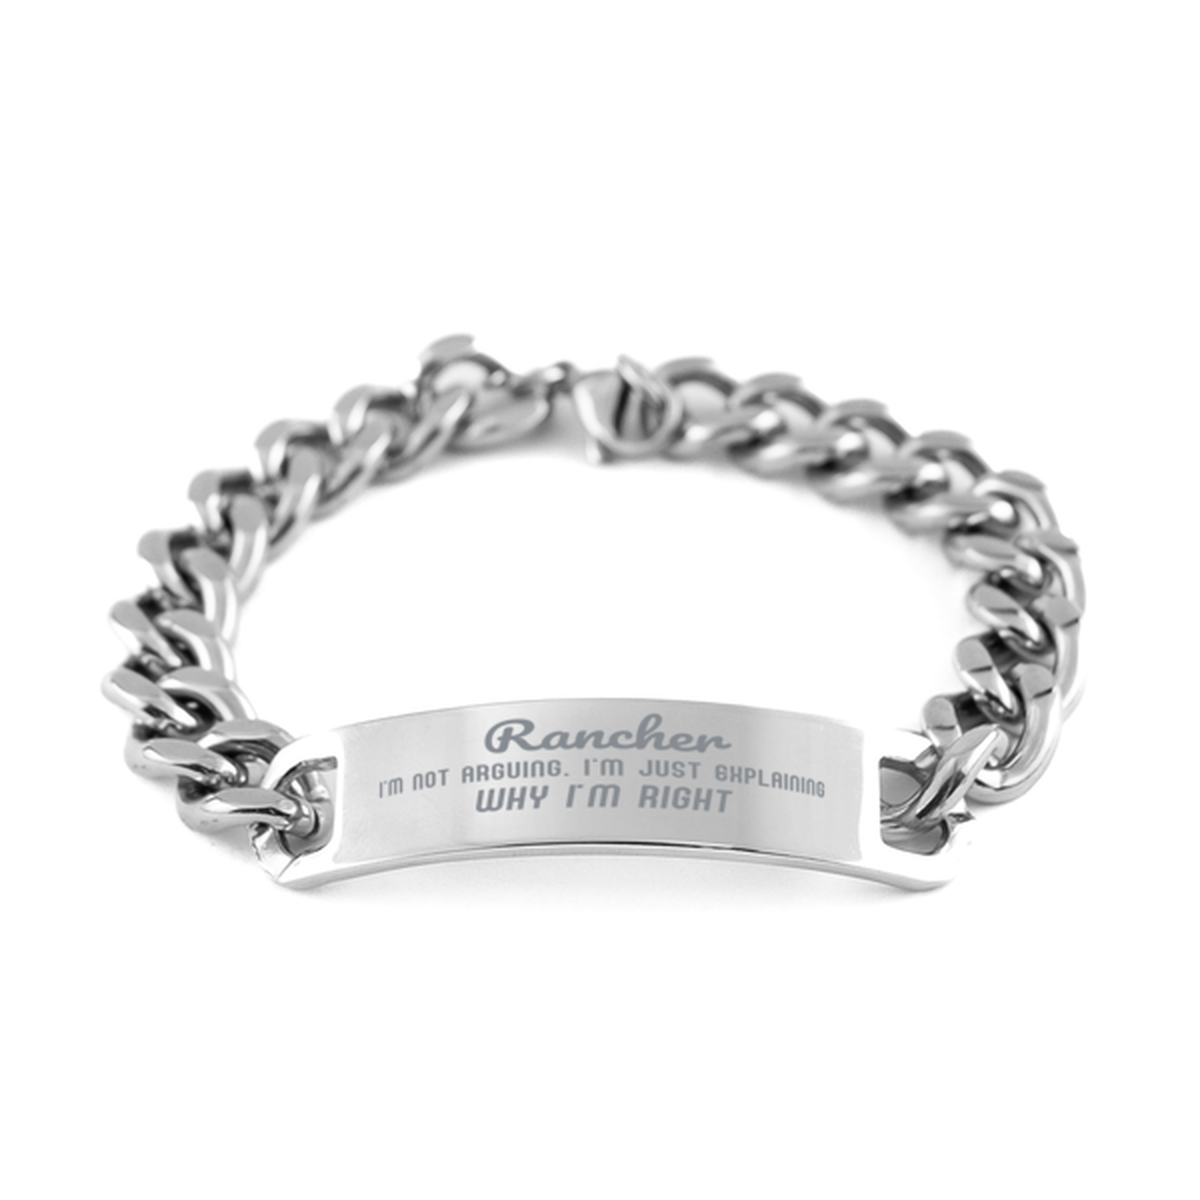 Rancher I'm not Arguing. I'm Just Explaining Why I'm RIGHT Cuban Chain Stainless Steel Bracelet, Graduation Birthday Christmas Rancher Gifts For Rancher Funny Saying Quote Present for Men Women Coworker